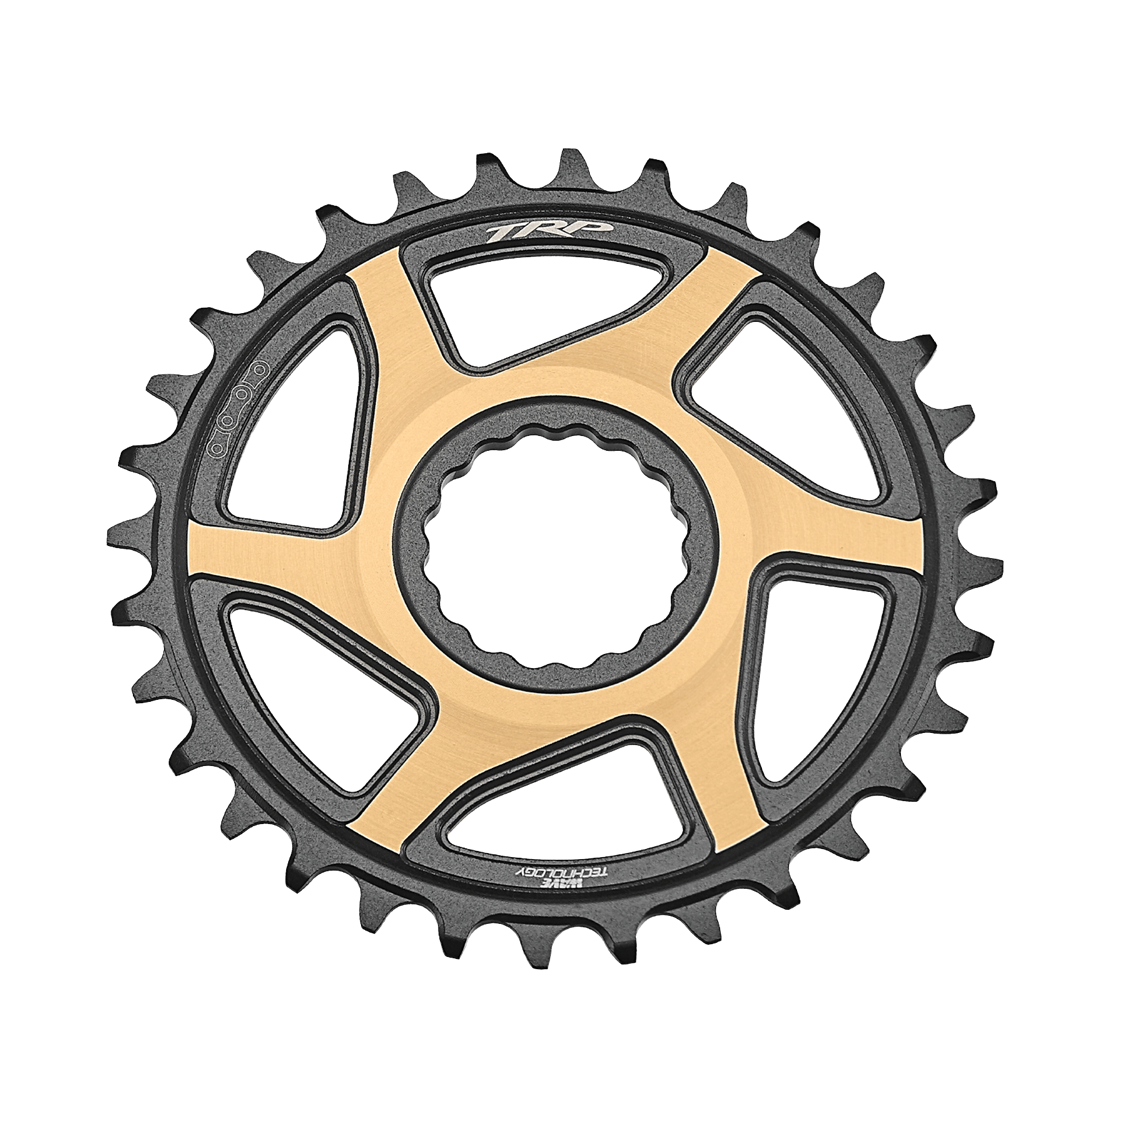 TRP 32T Boost 3mm Offset Chainring (CR-M9050), Duotone (Sandblasted Black/Gold)